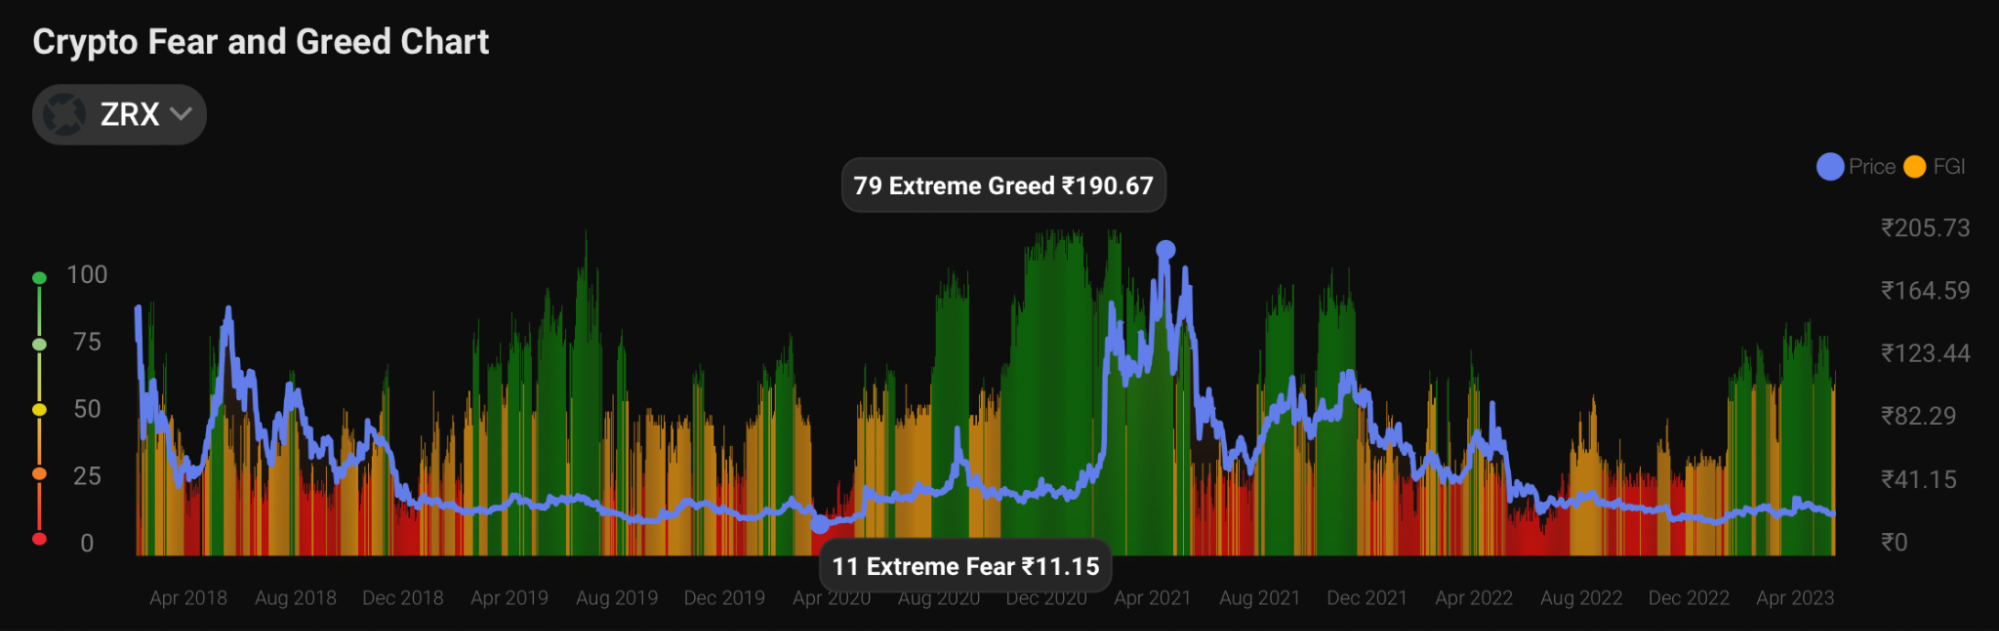 The Fear and Greed Index of ZRX